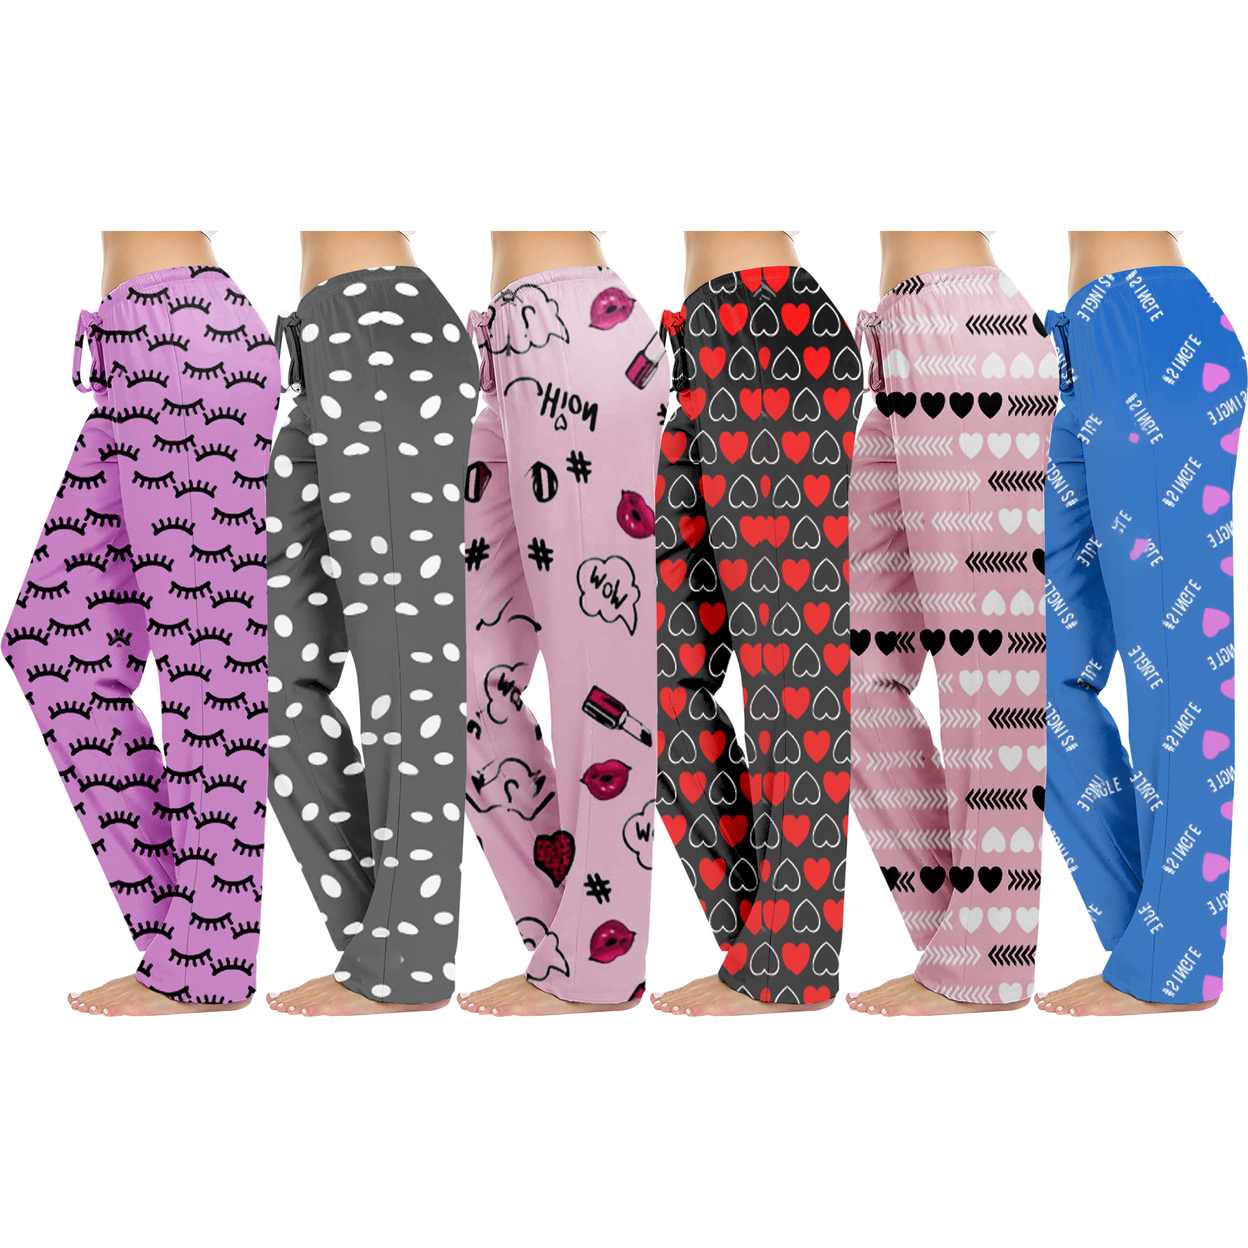 Multi-Pack: Women's Casual Fun Printed Lightweight Lounge Terry Knit Pajama Bottom Pants - 2-pack, Small, Love